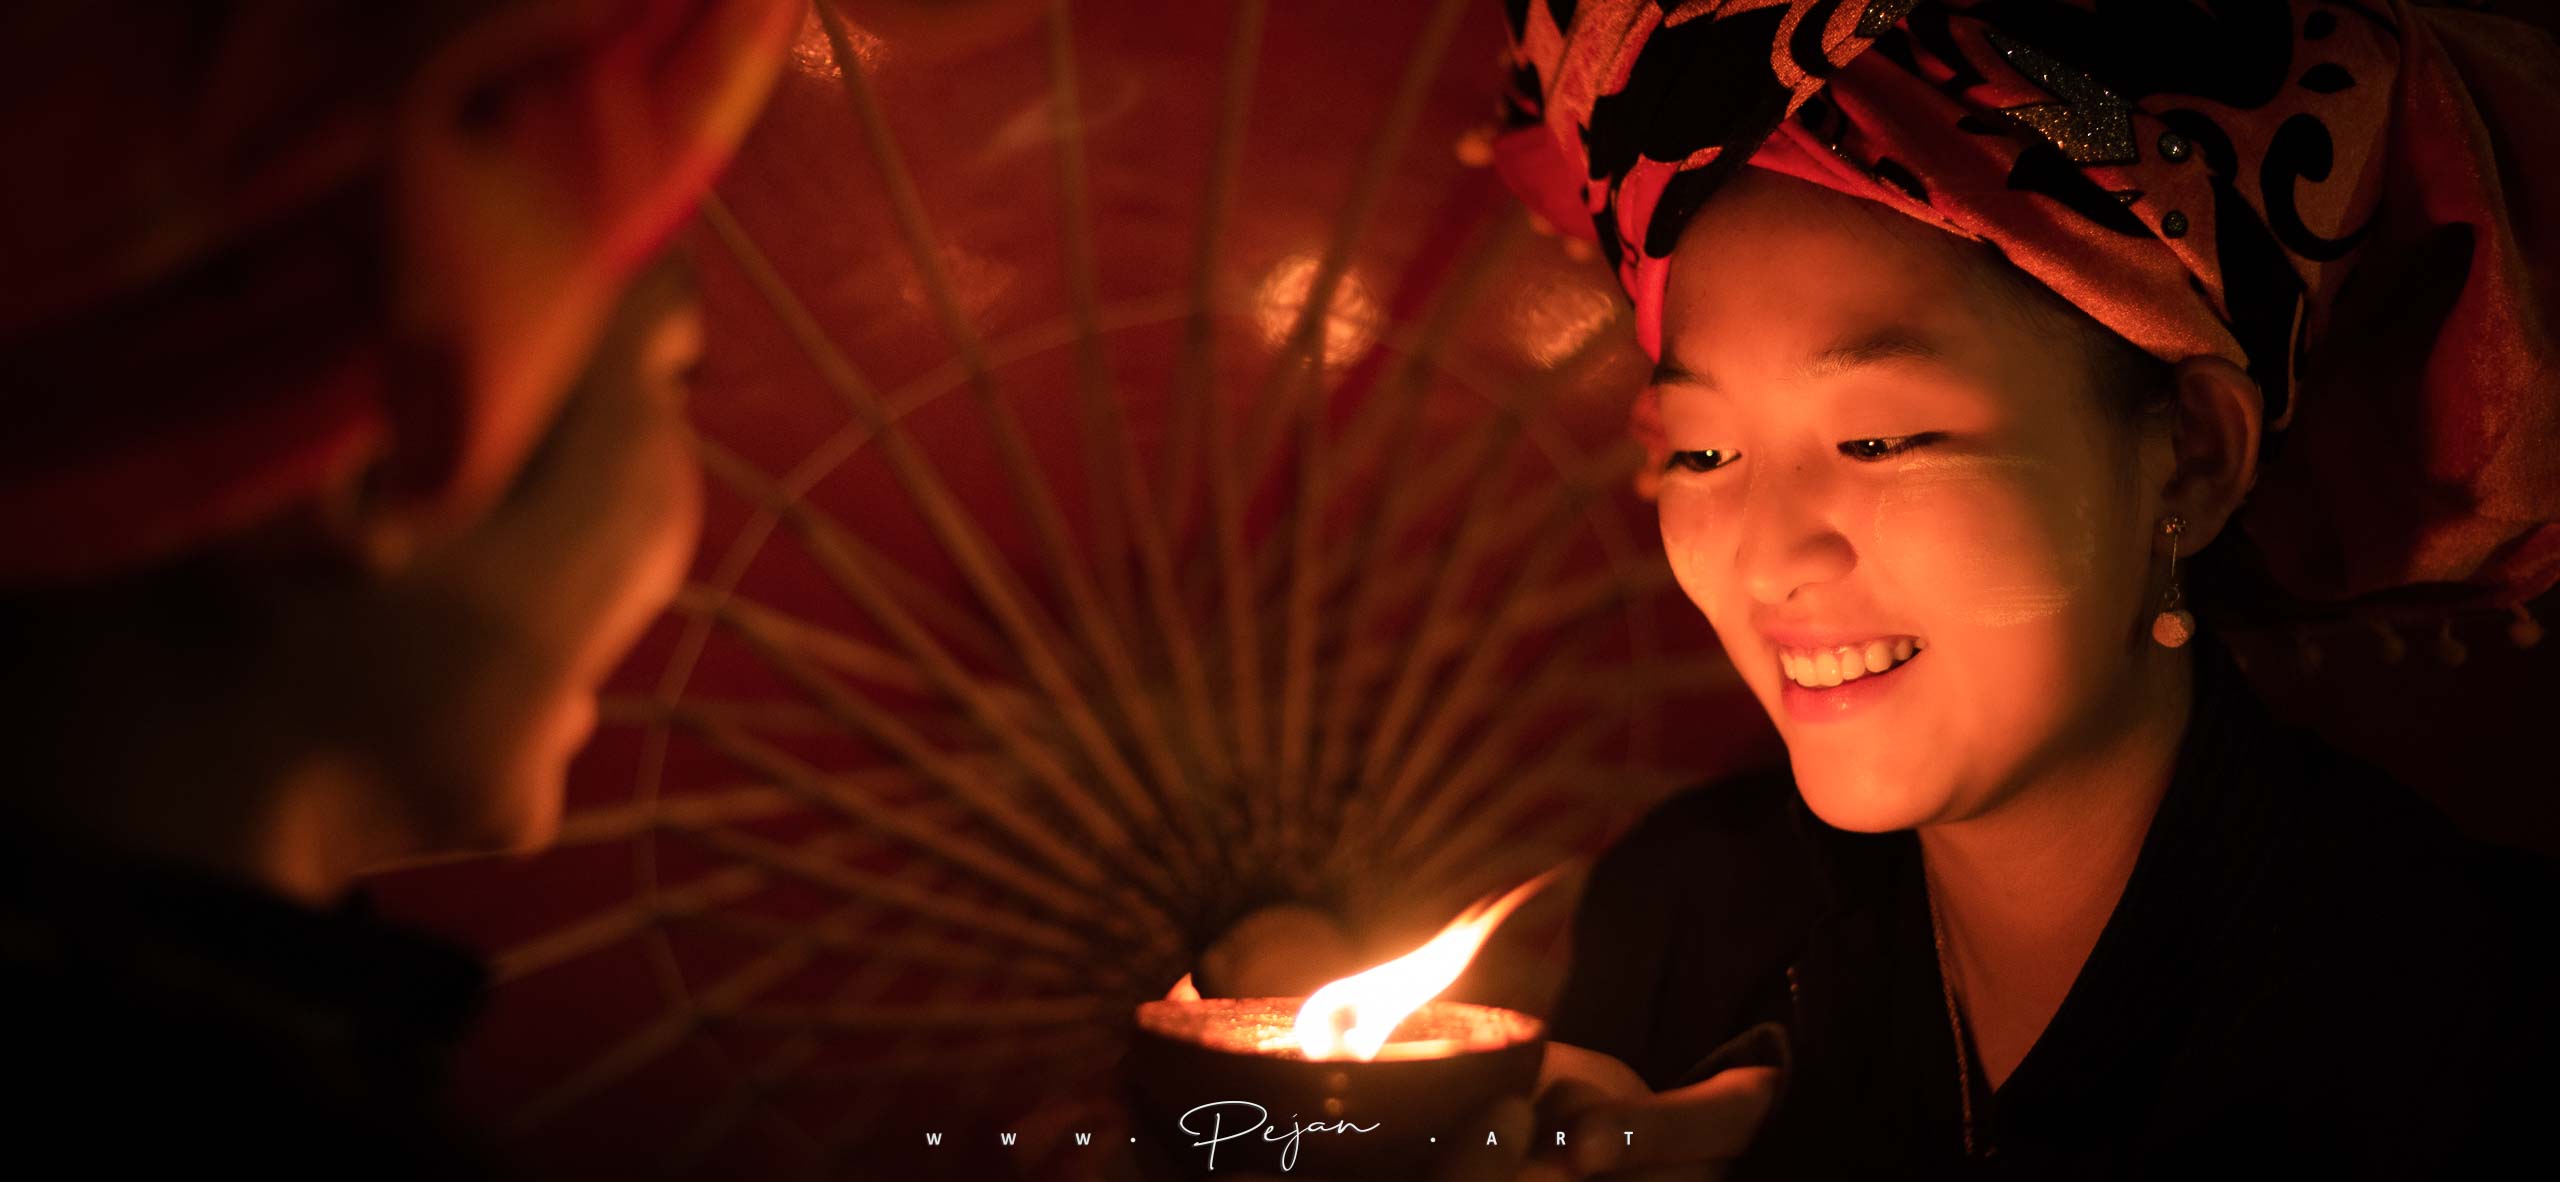 Night portrait of a young woman of the Pao ethnic group who smiles at the flame of a candle in front of a parasol. She wears tanaka and a traditional red scarf of her ethnicity. Inle Lake, Myanmar.